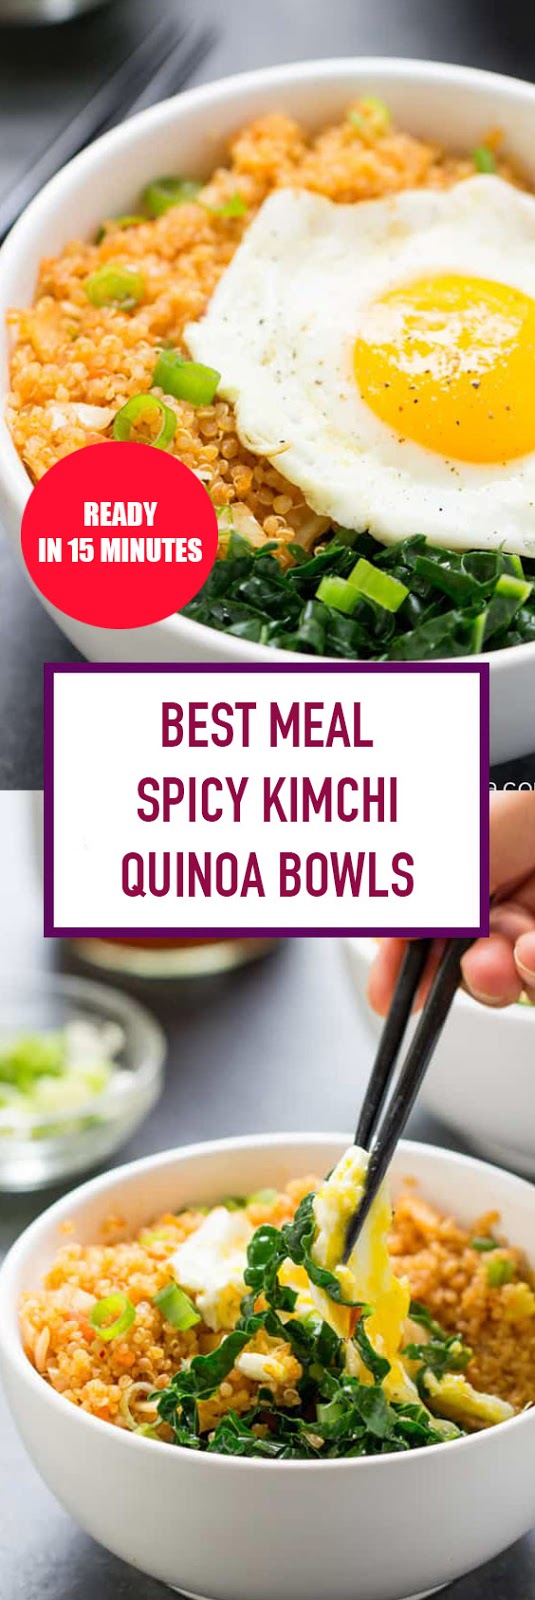 Ready in 15 Minutes! Best Meal Spicy Kimchi Quinoa Bowls